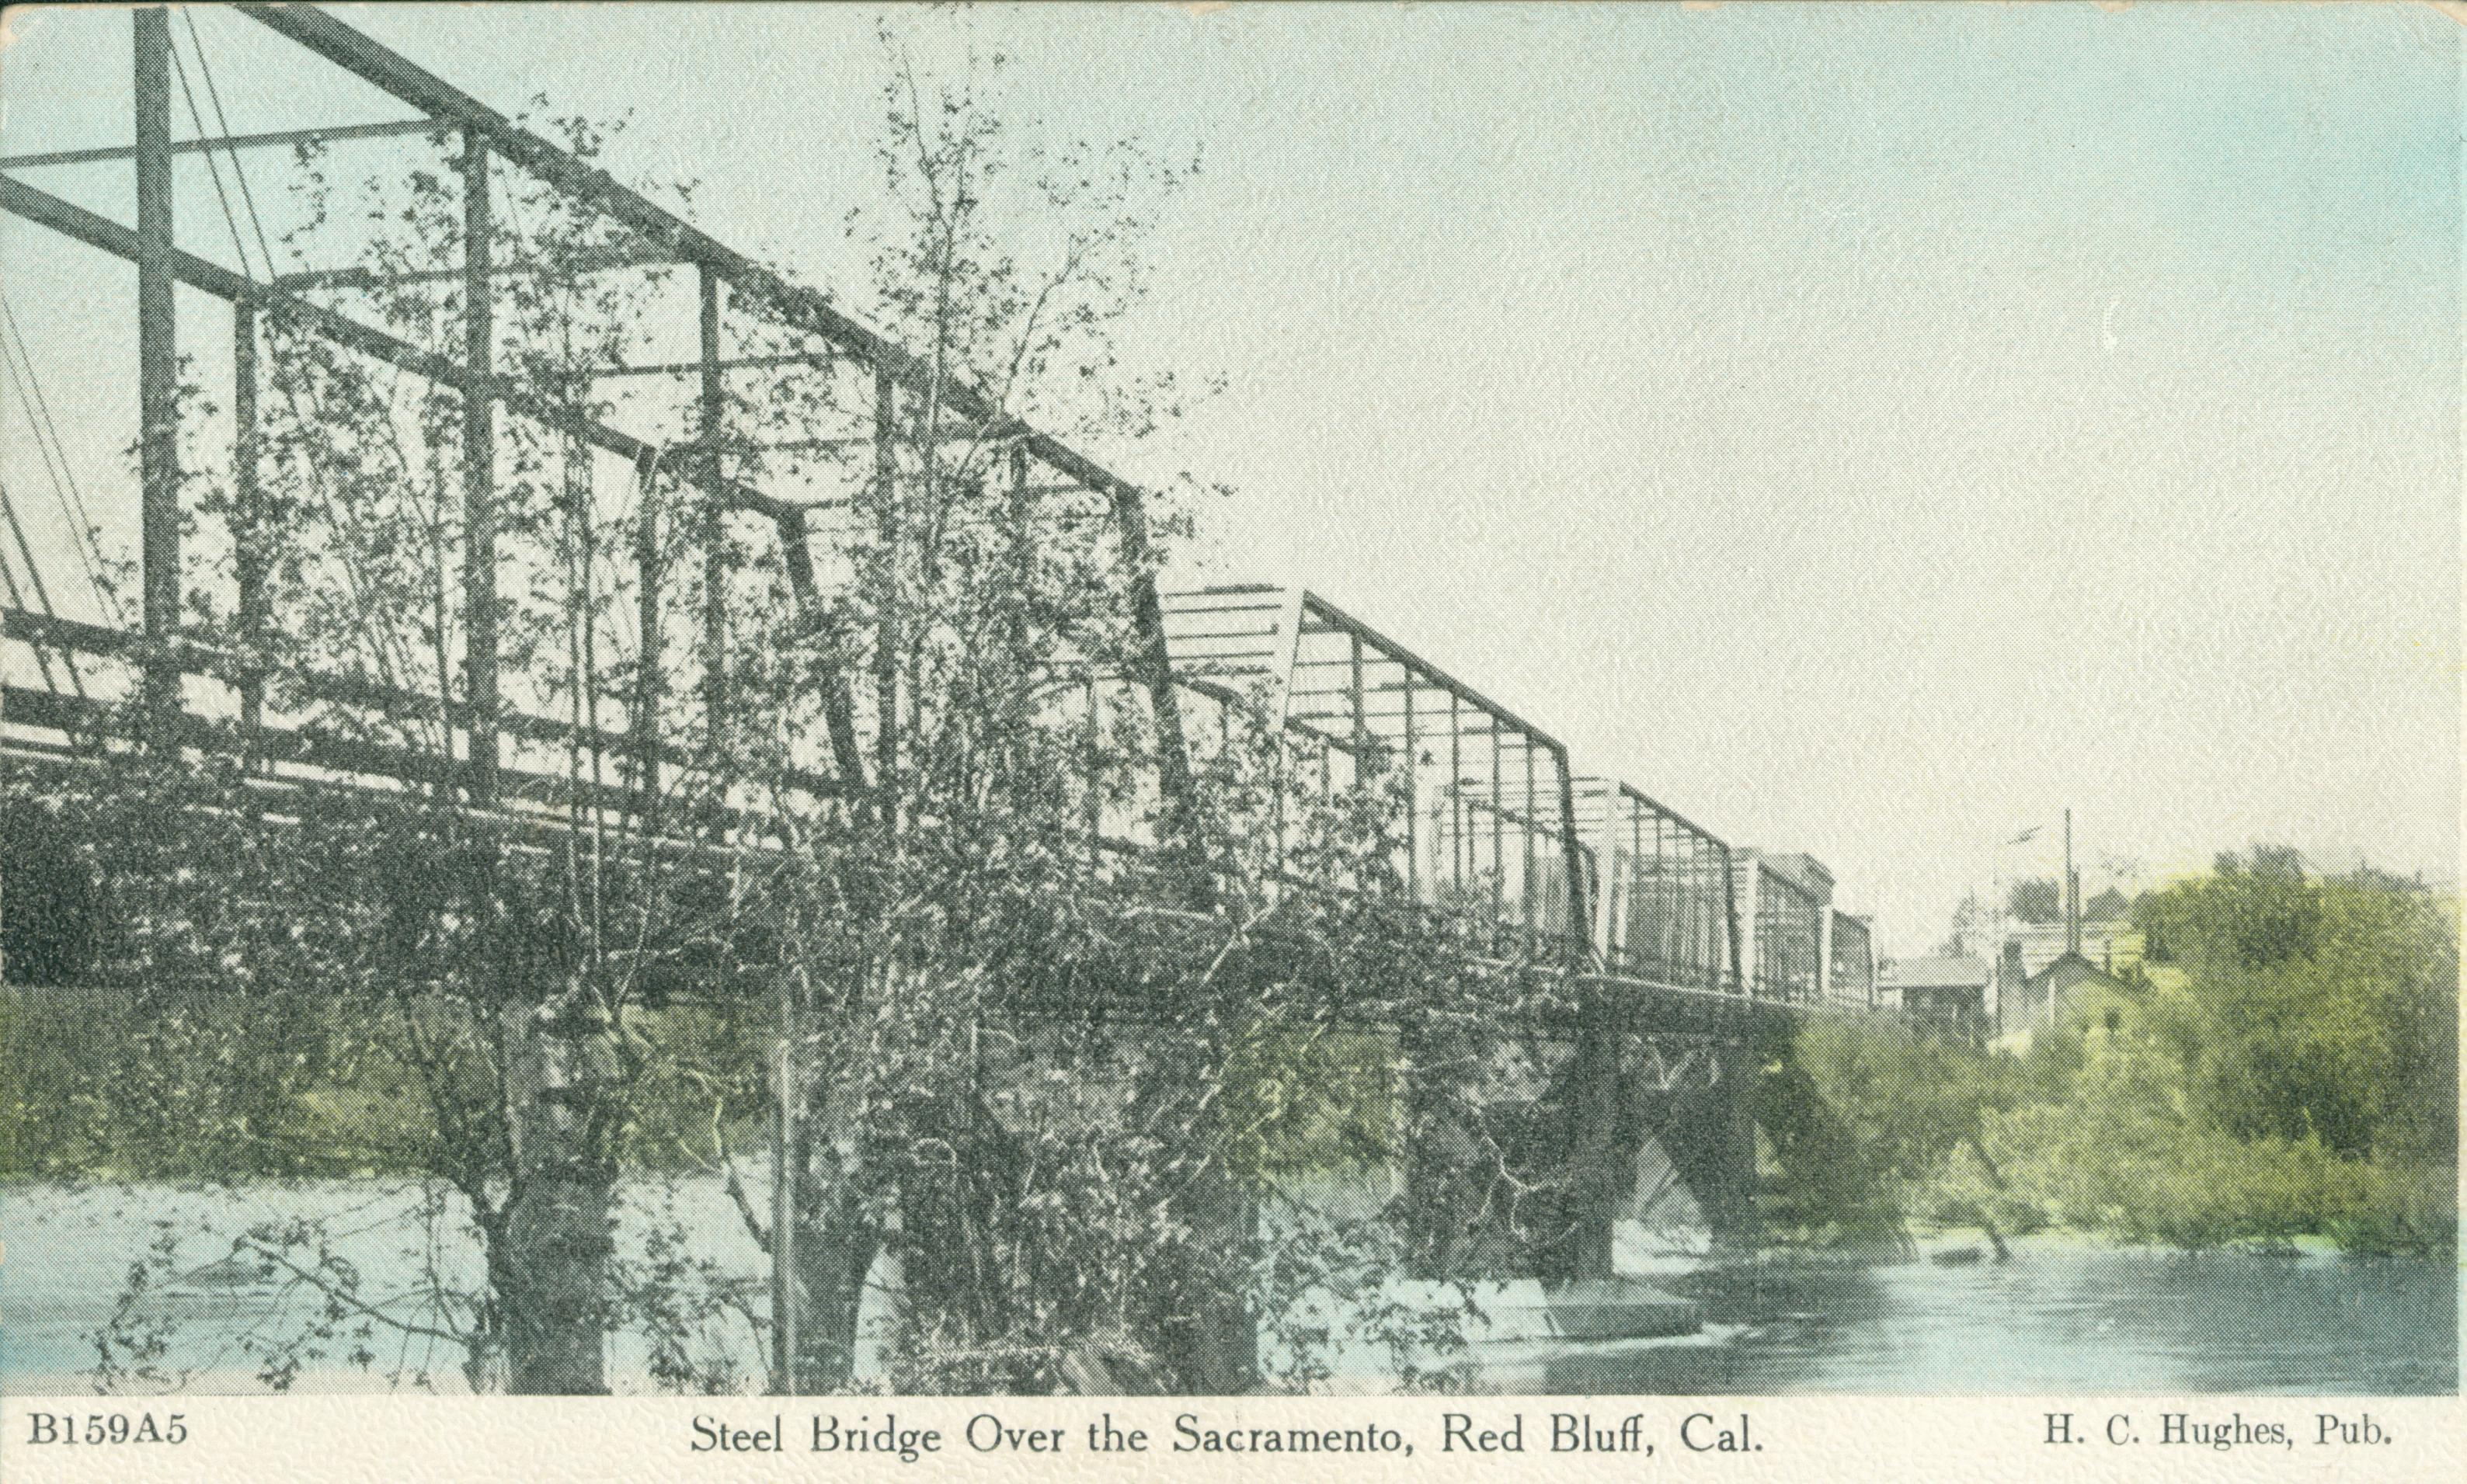 Shows a steel bridge spanning a river with one shoreline in the background